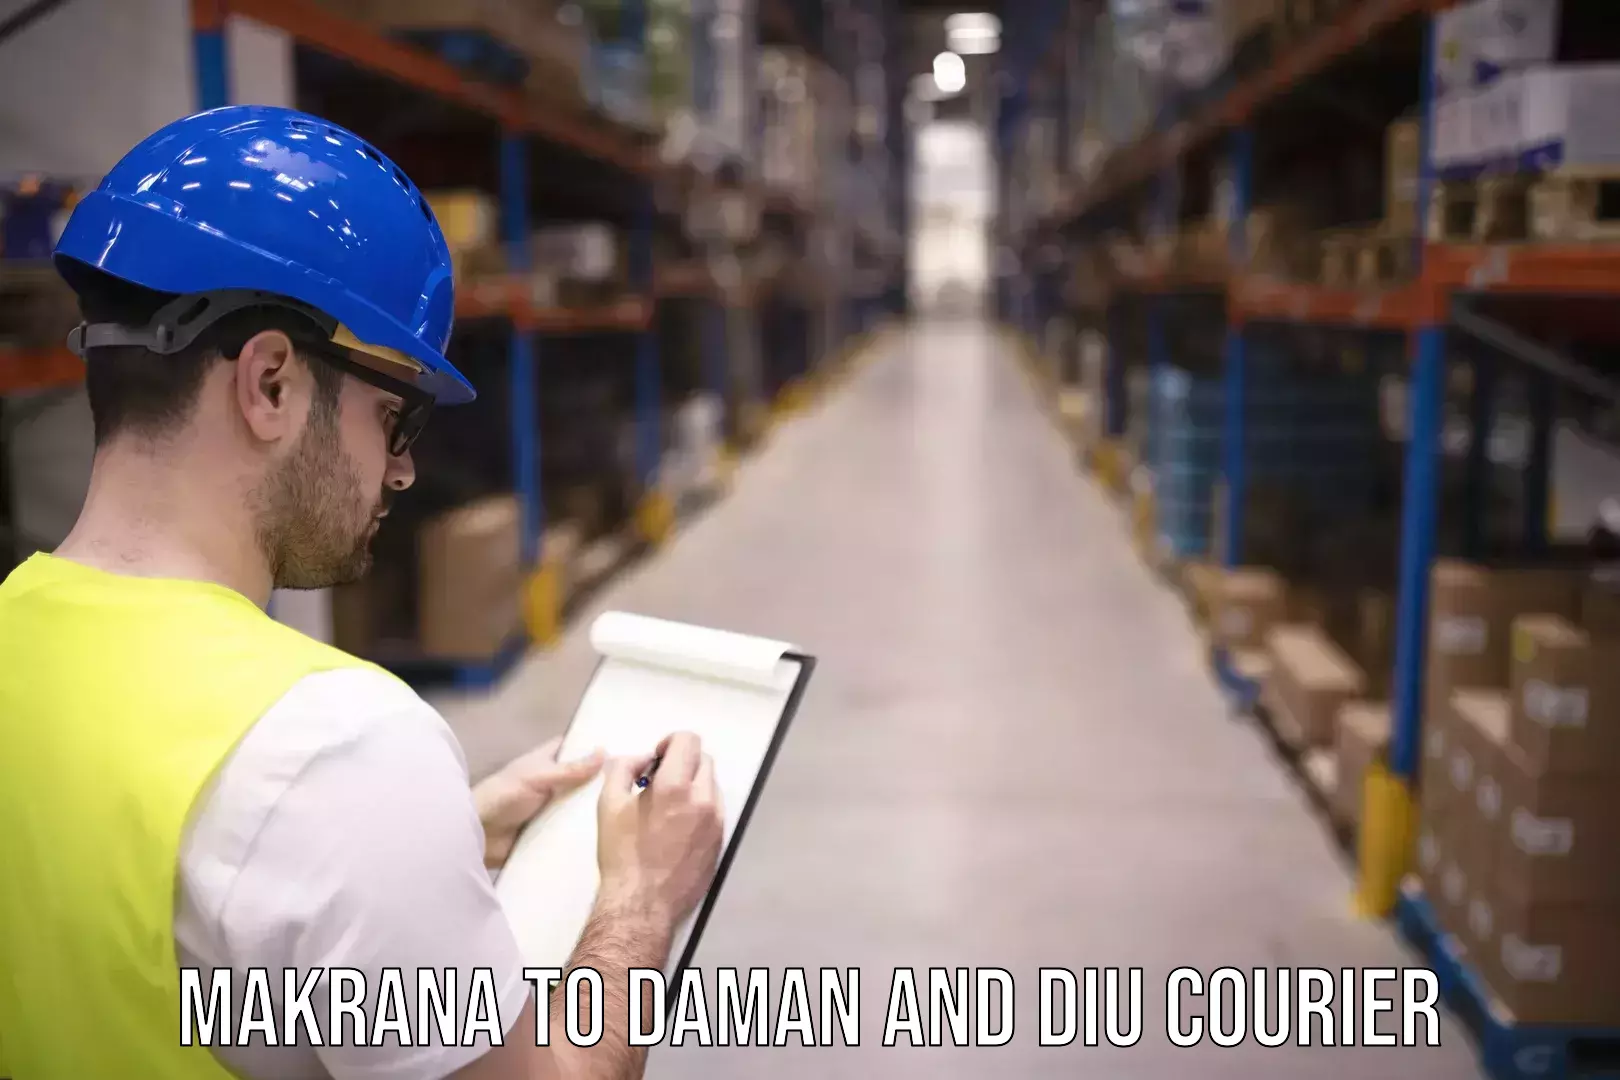 Global courier networks Makrana to Daman